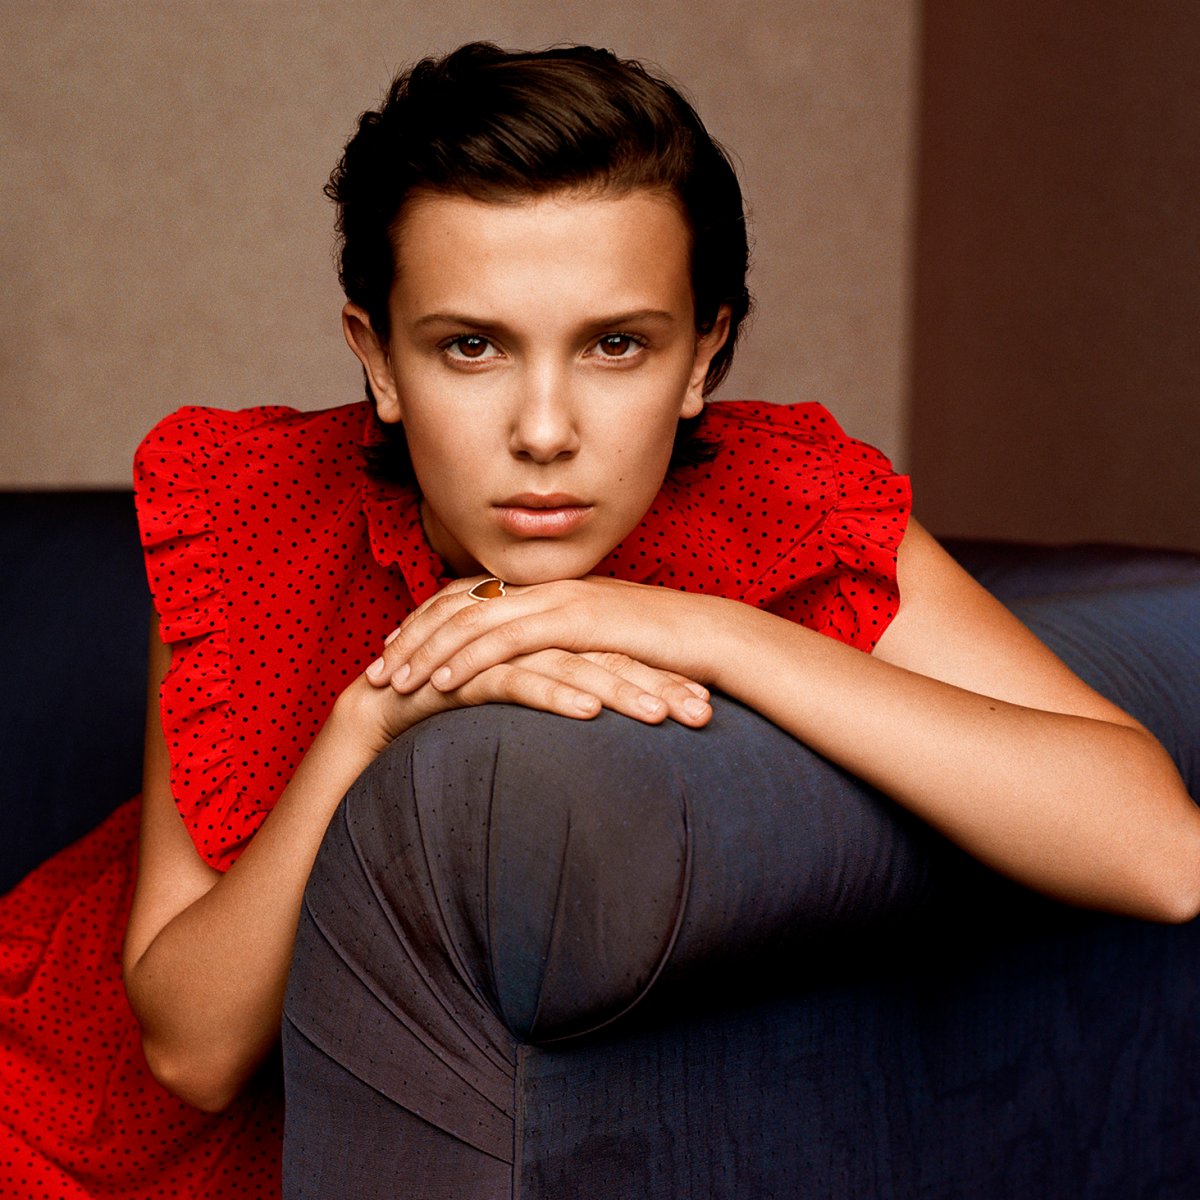 Millie Bobby Brown Is on the 2018 TIME 100 List | Time.com